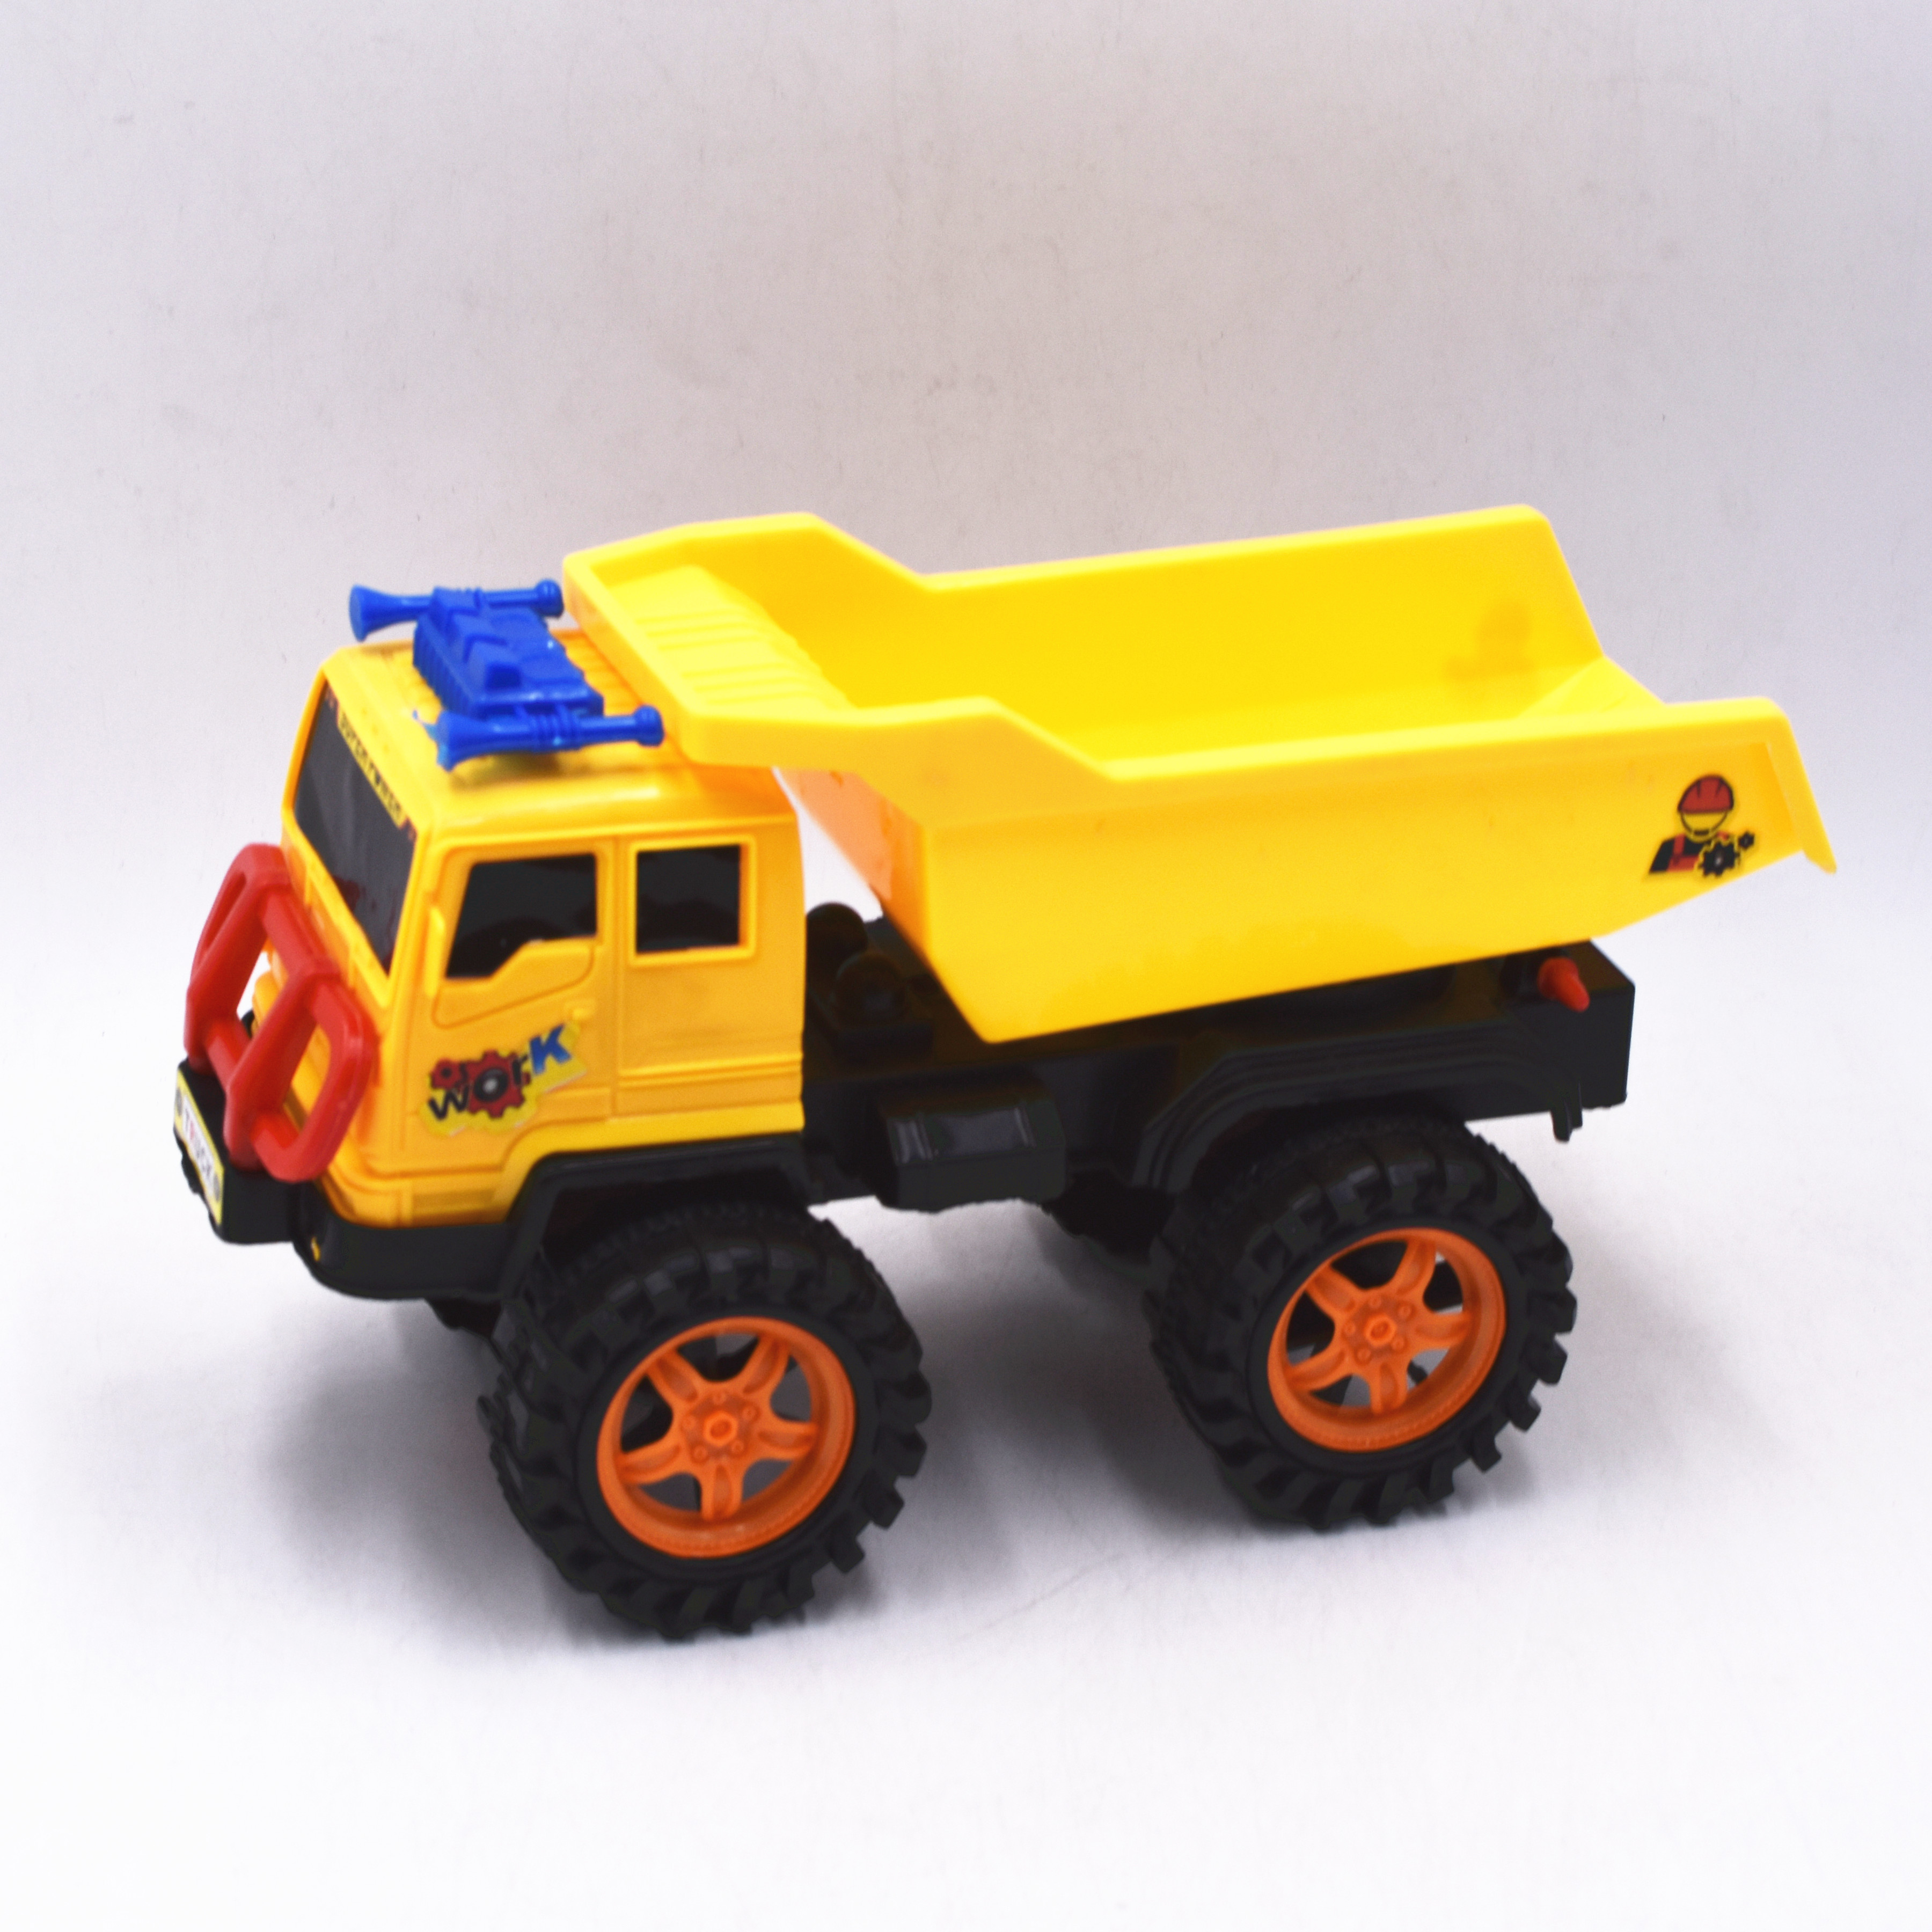 FREE WHEEL TRUCK TOY LY1710